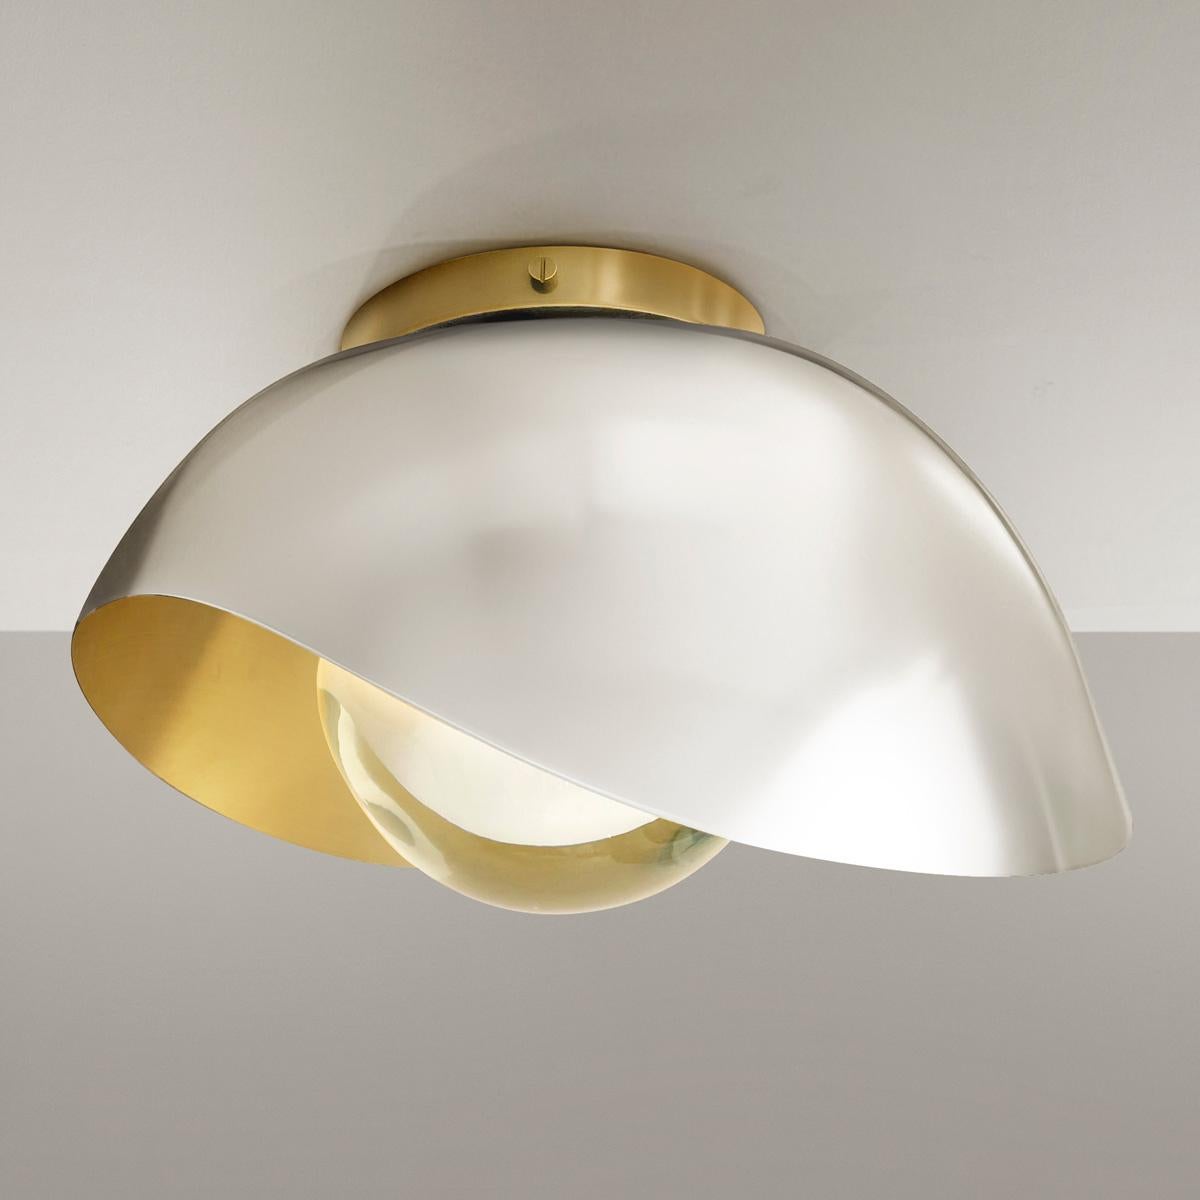 Perla Flushmount Ceiling Light by Gaspare Asaro-Satin Brass/Polished Nickel In New Condition For Sale In New York, NY